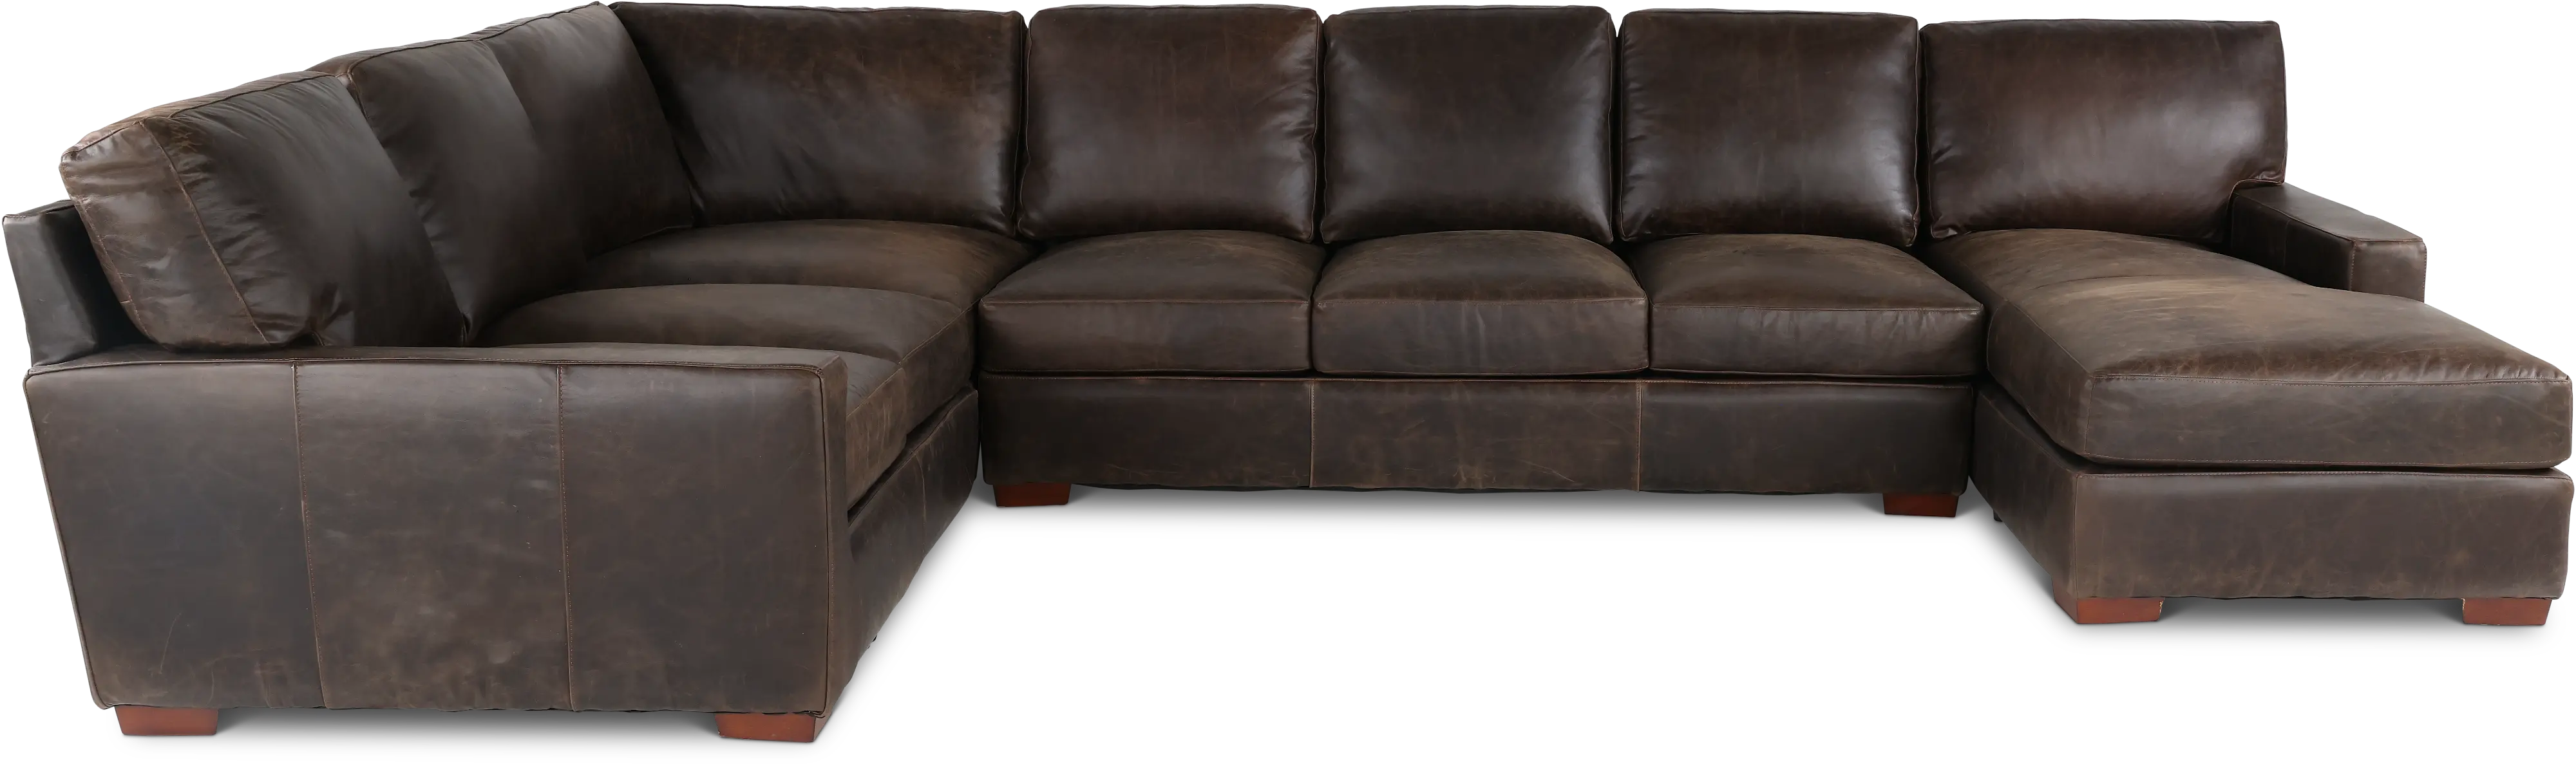 Mayfair Java Brown Leather 4 Piece Sectional